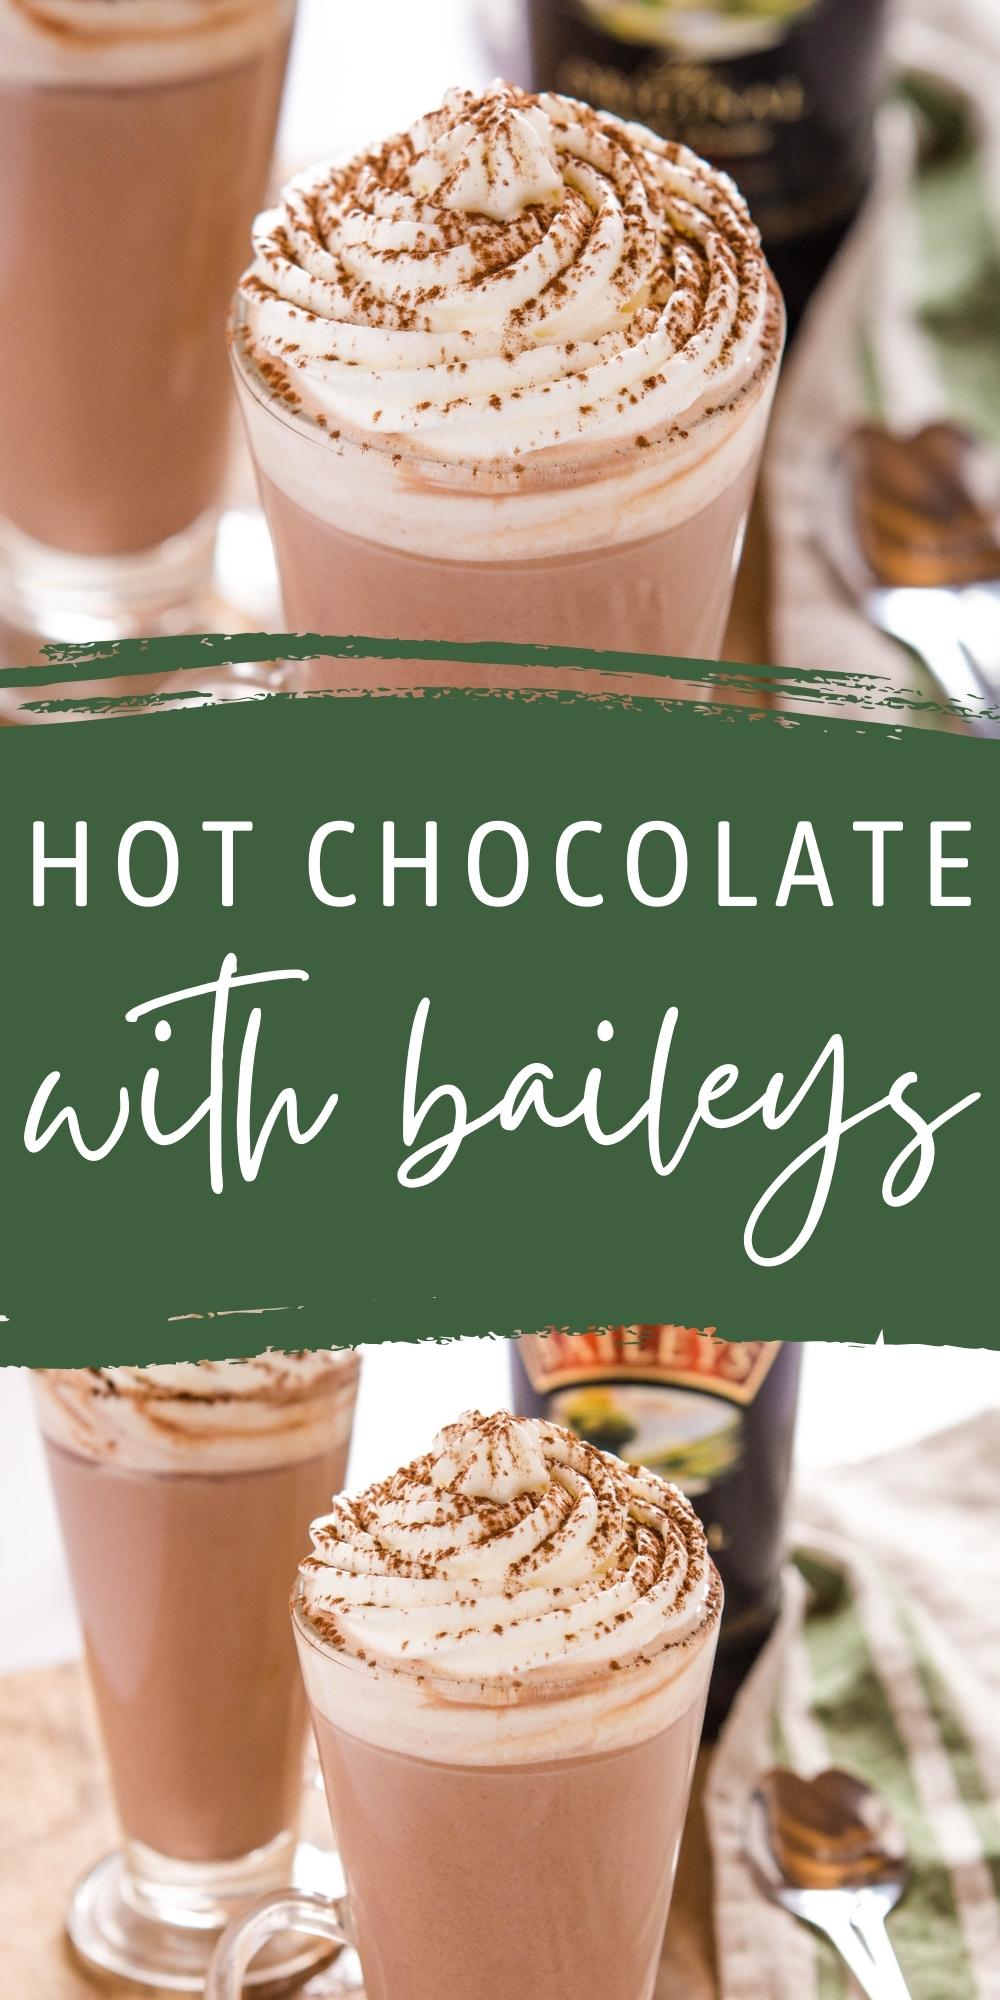 This Hot Chocolate with Baileys recipe is ultra rich and decadent and made with Baileys Irish Cream! Perfect for the holidays! Recipe from thebusybaker.ca! #hotchocolatewithbaileys #baileysirishcream #hotcocoa #alcohol #adultdrink #party #holidayparty #newyearseve via @busybakerblog